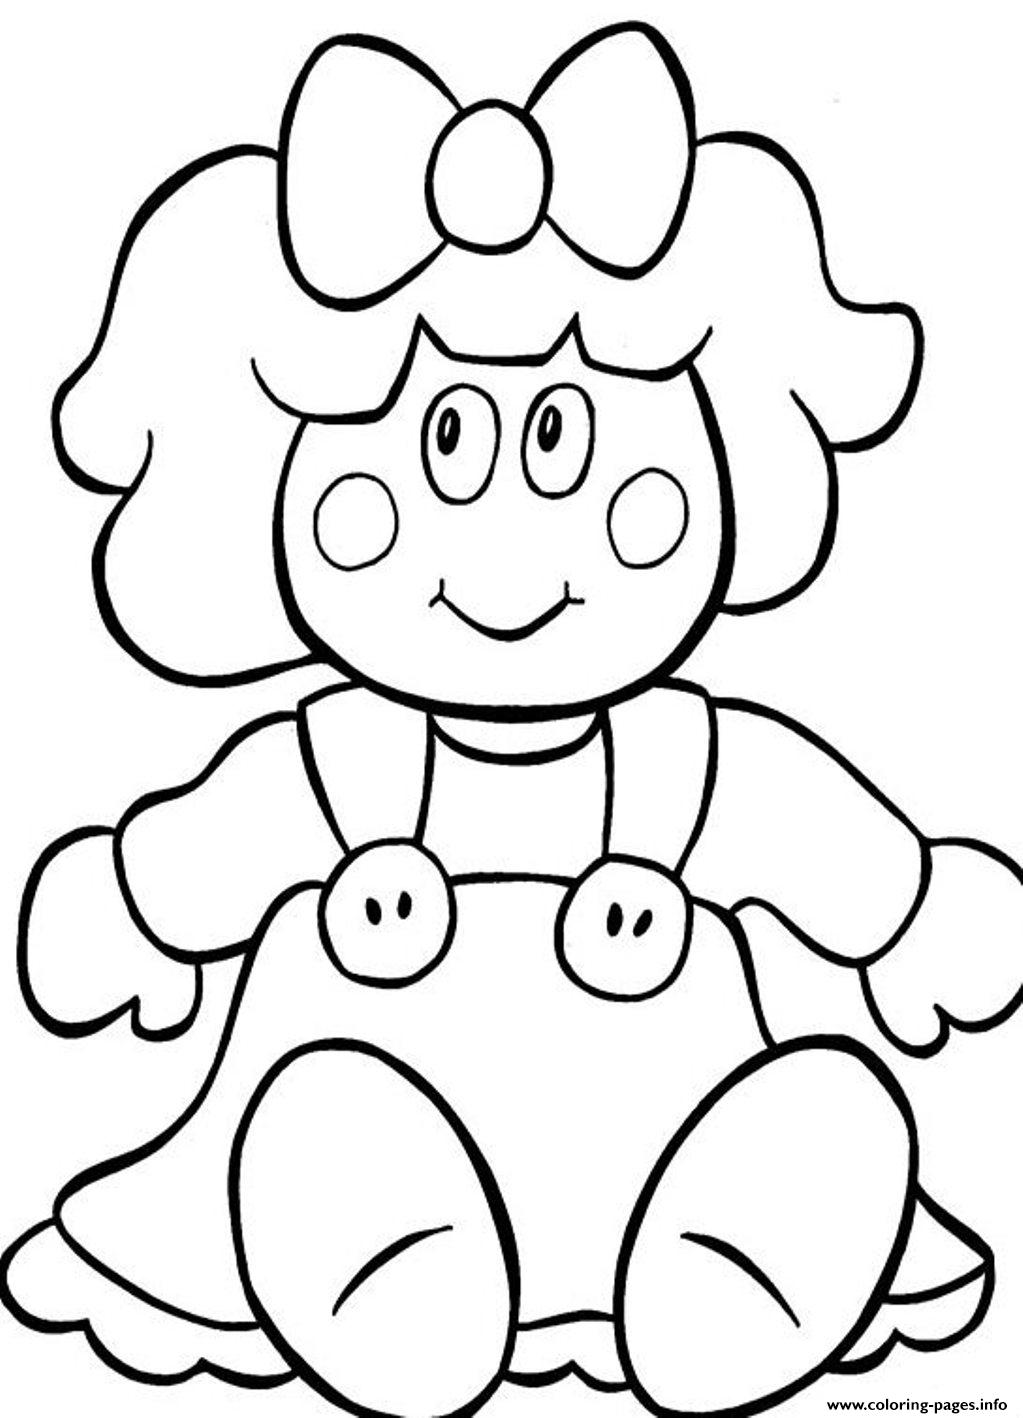 Doll Coloring Pages Printable at GetDrawings Free download